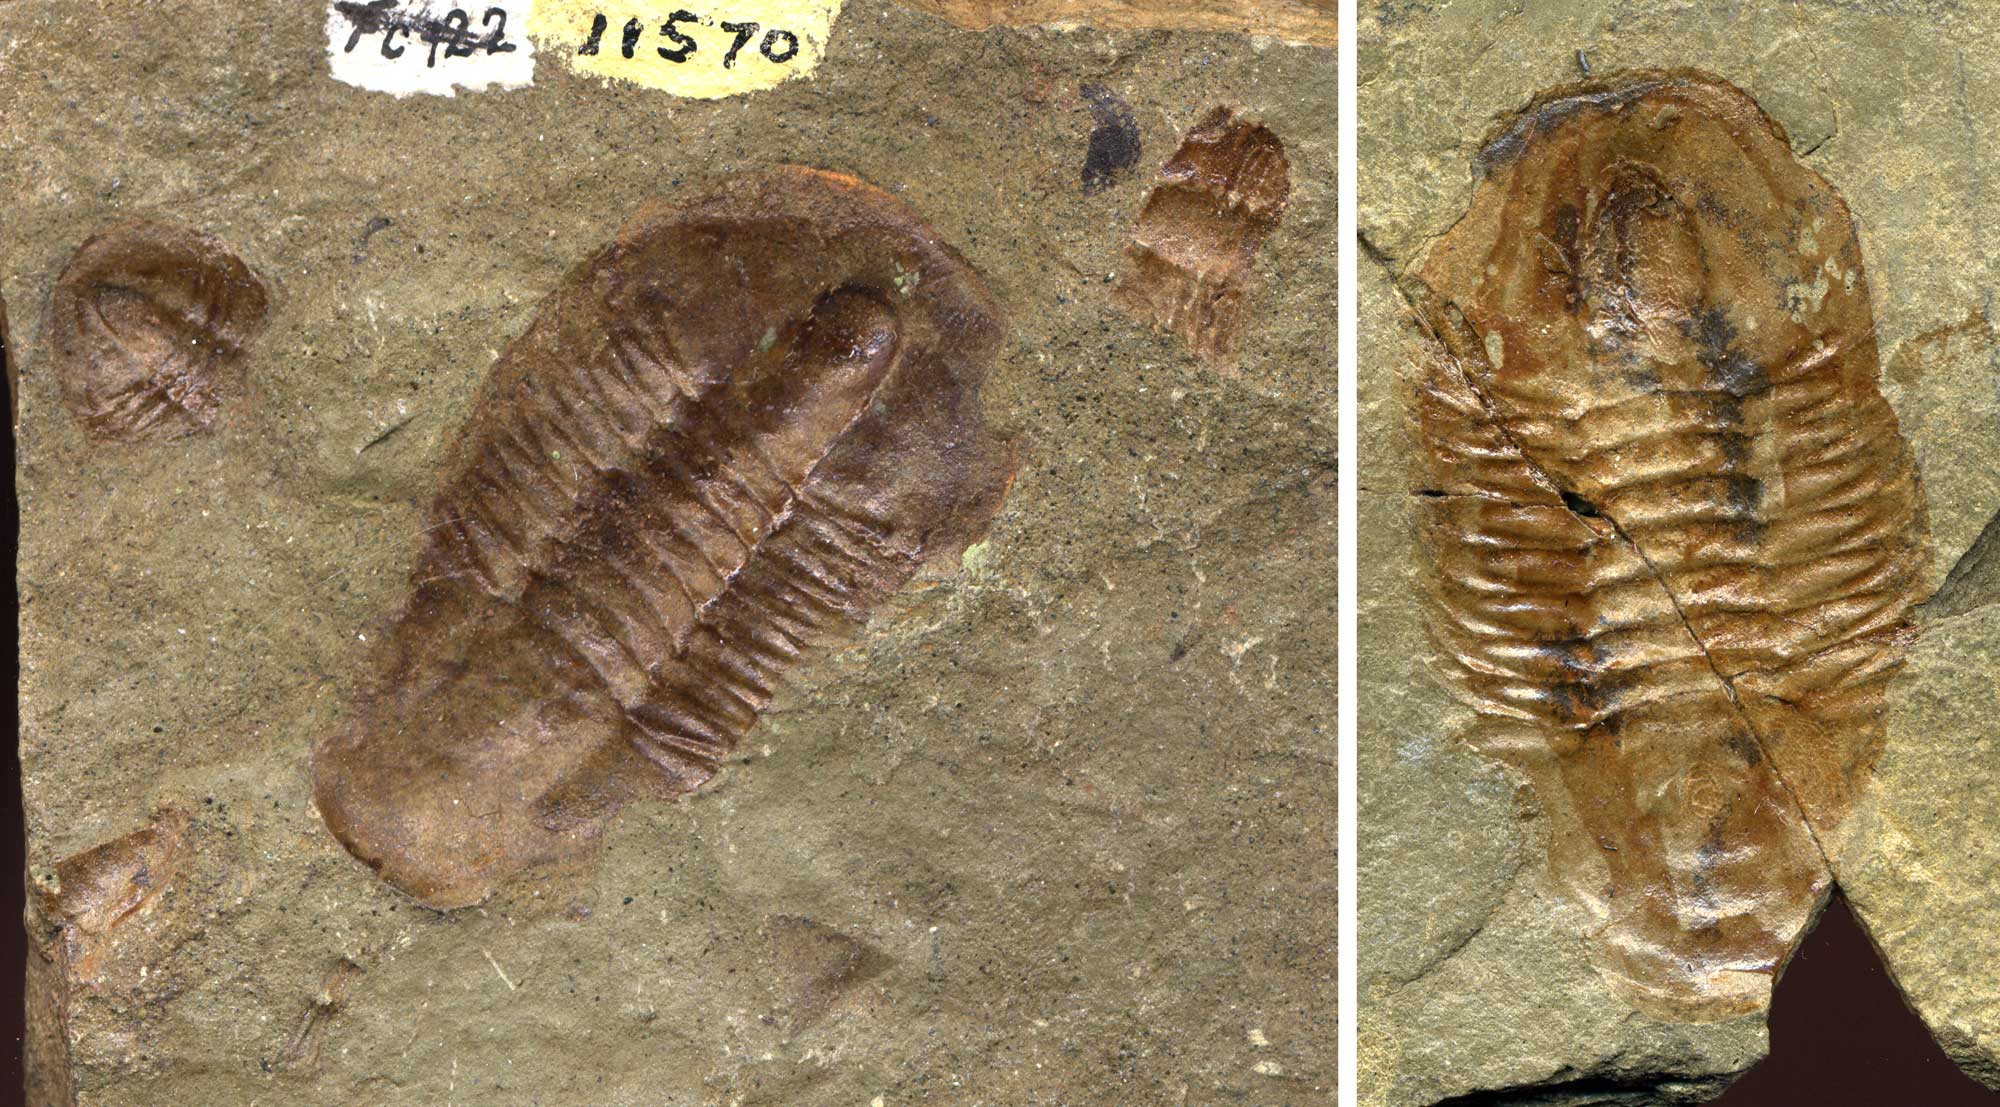 2-panel figure showing photographs of trilobites from the Cambrian Bright Angel Shale, Grand Canyon. Panel 1: specimen with a single whole trilobite and several trilobite fragments; the whole trilobite has no spines or ornamentation. Panel 2: Specimen of a single whole trilobite; this trilobite looks similar to the complete trilobite in the first panel.